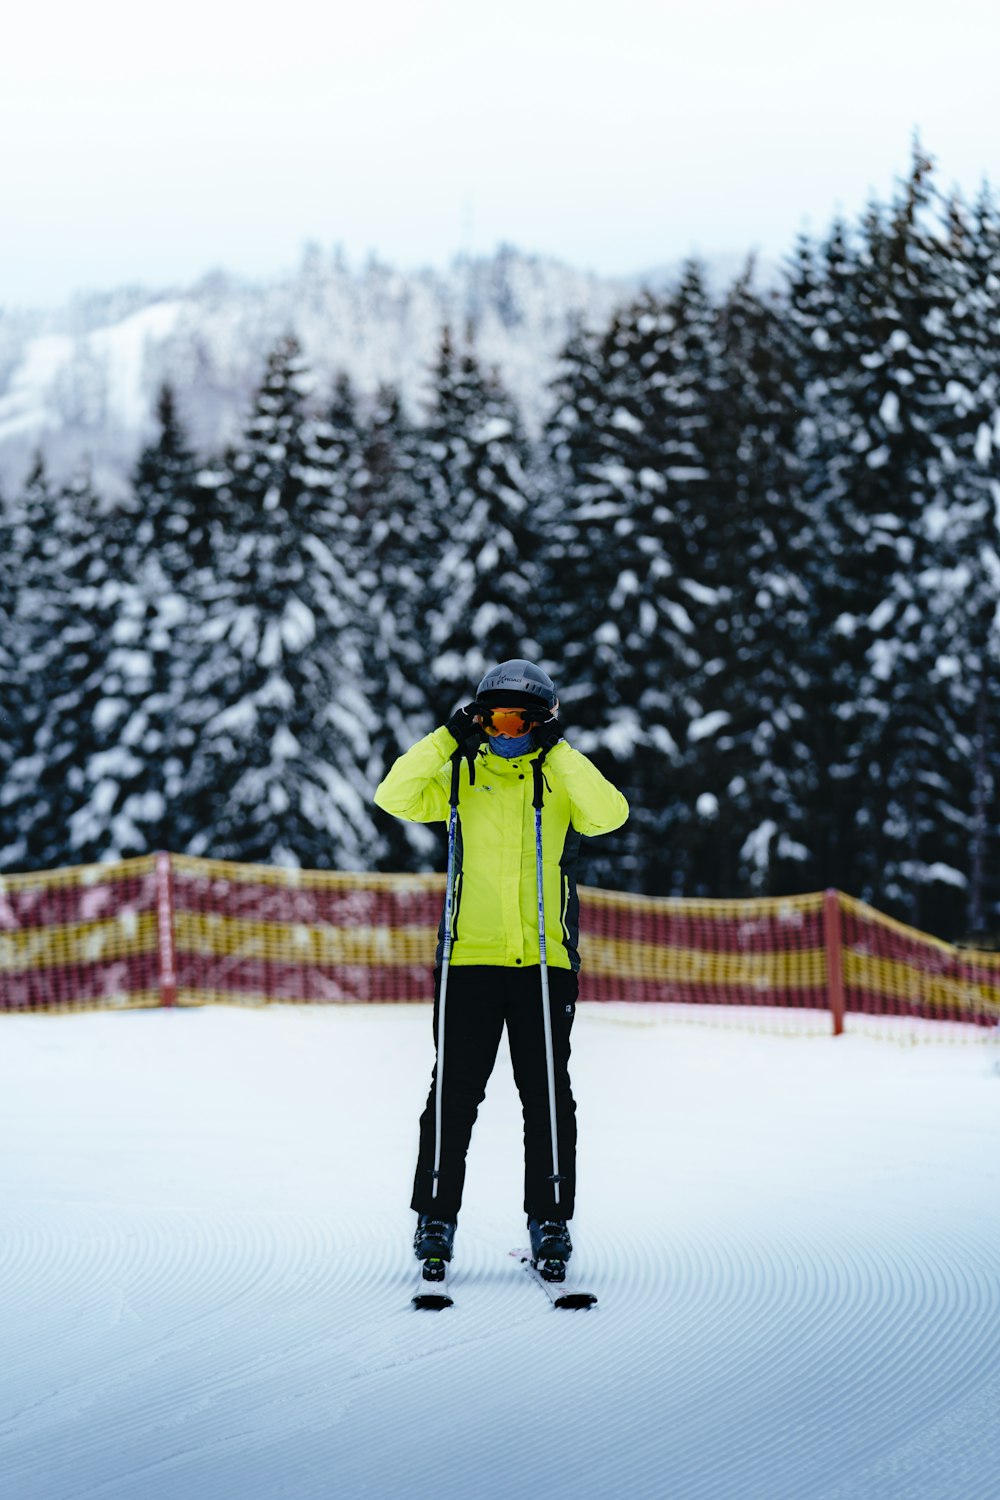 a person standing on skis in the snow